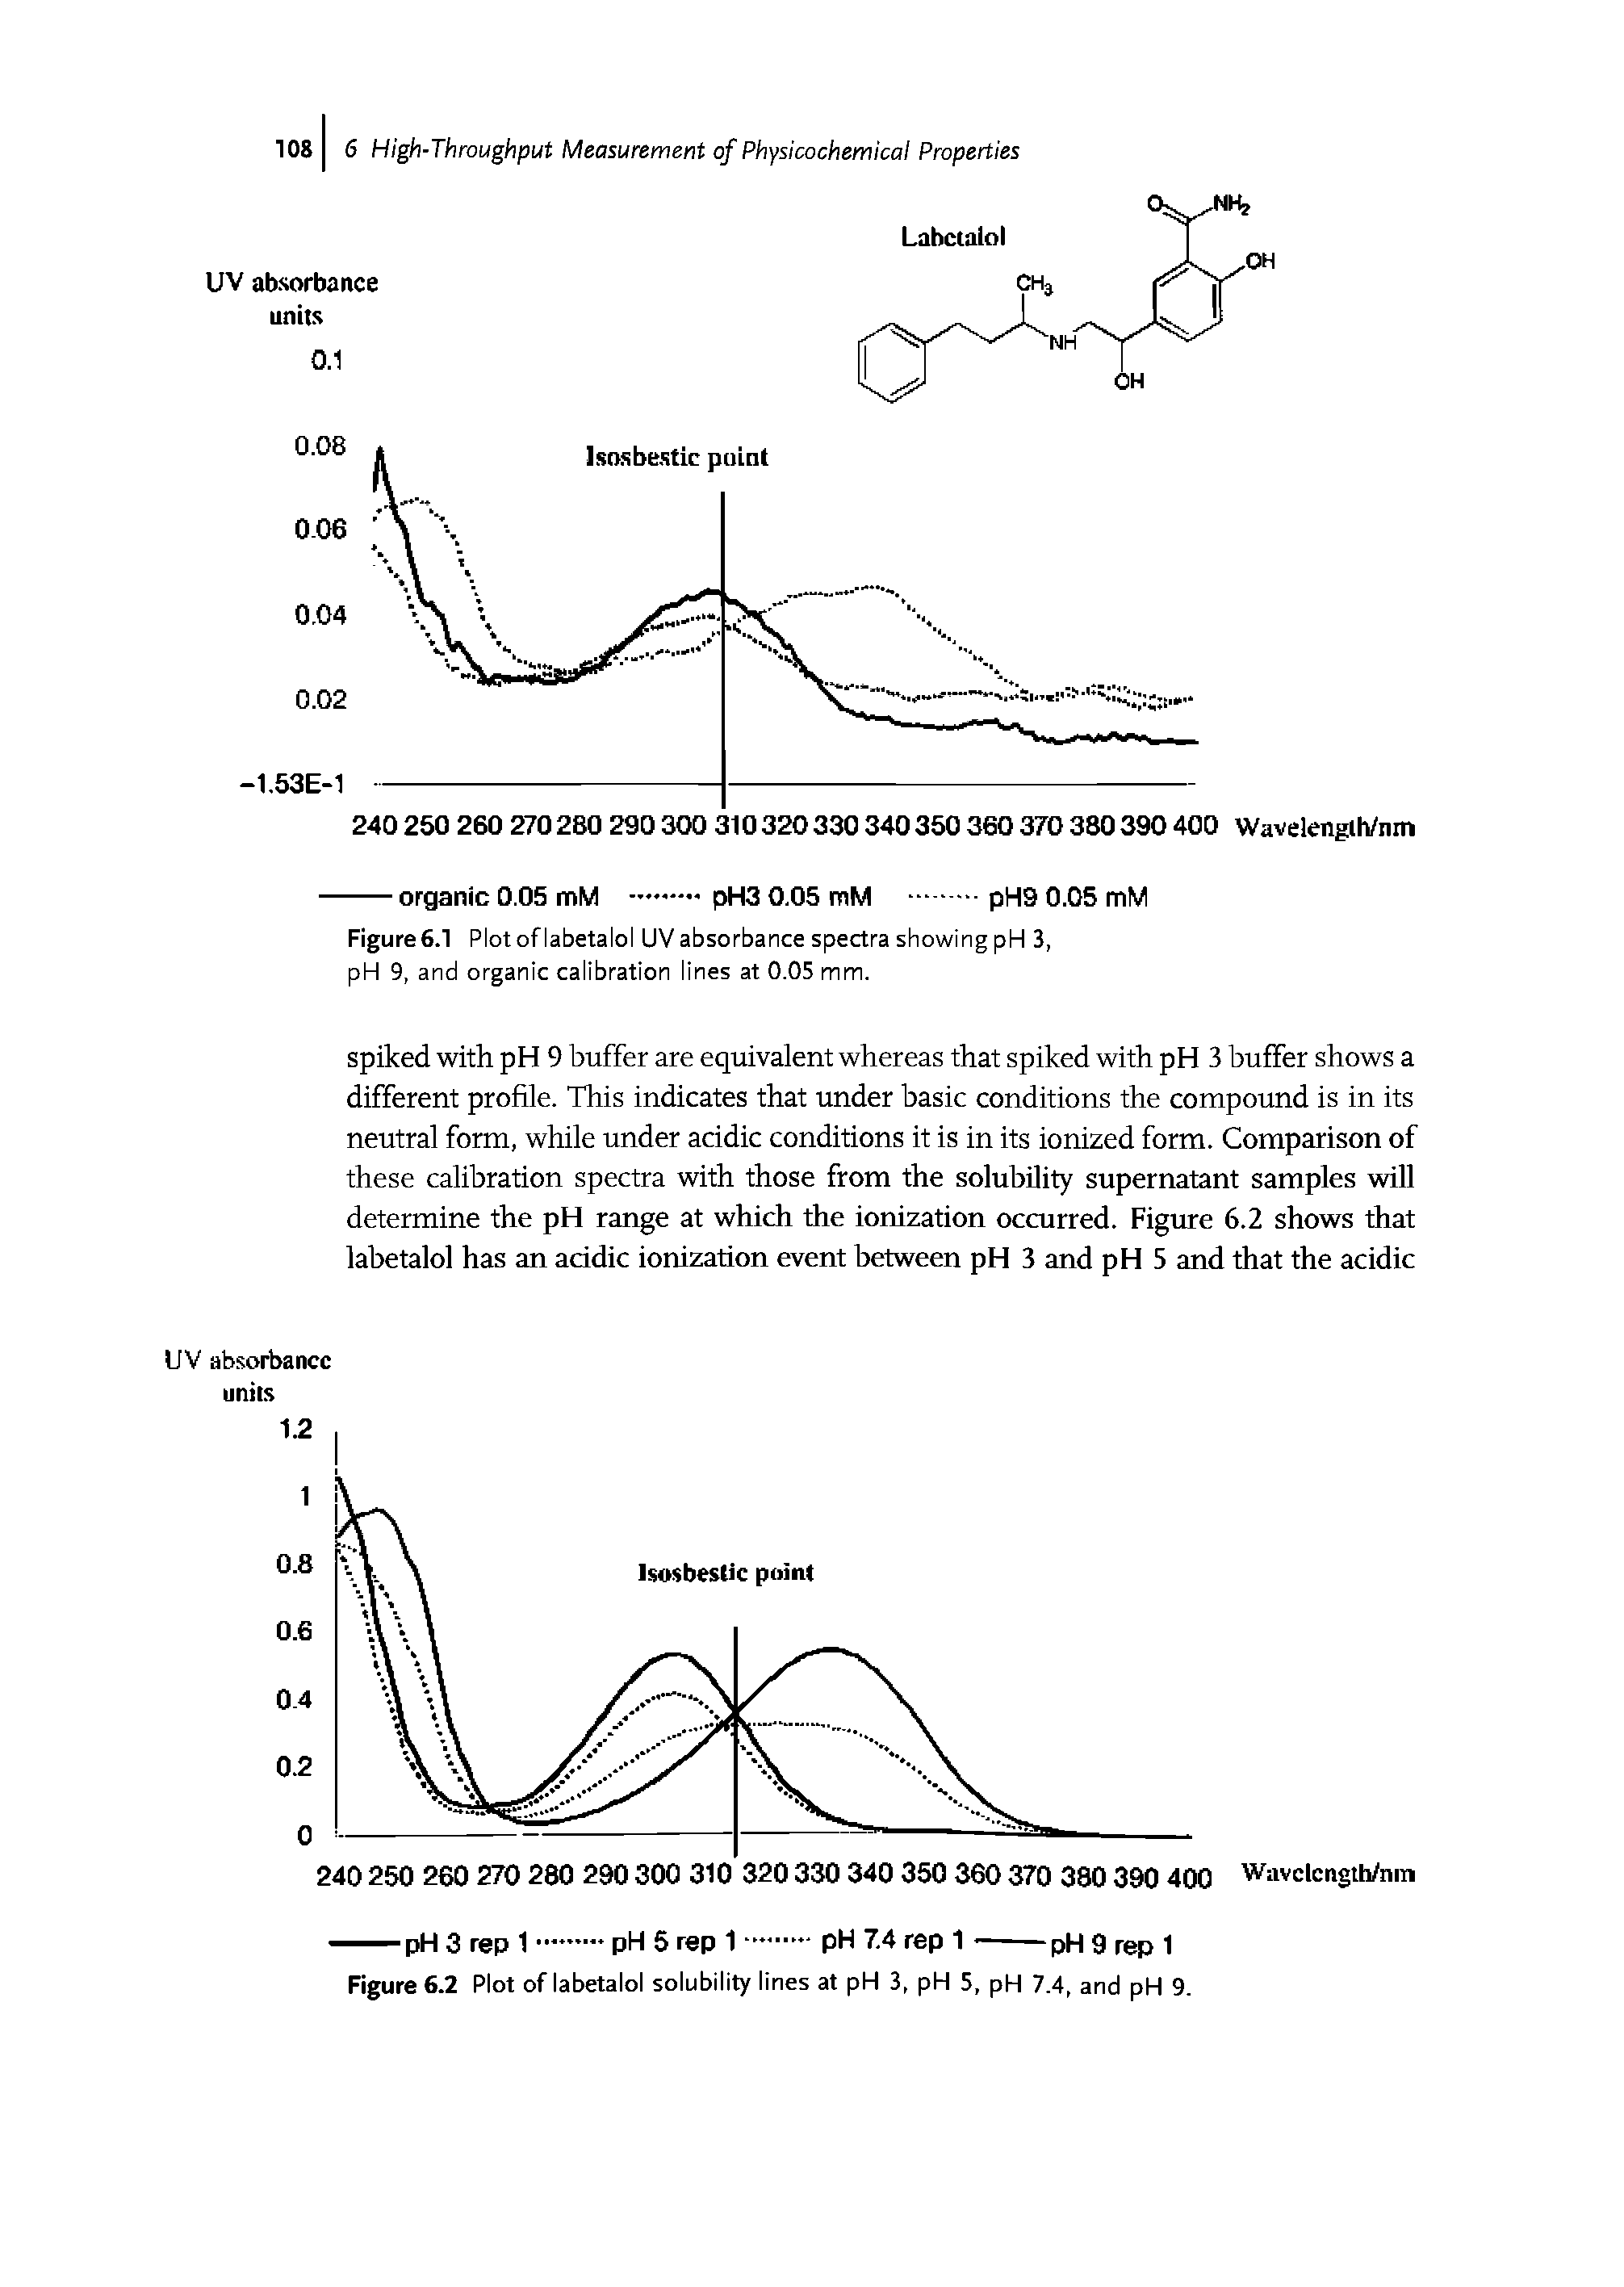 Figure6.1 Plotoflabetalol UV absorbance spectra showing pH 3, pH 9, and organic calibration lines at 0.05 mm.